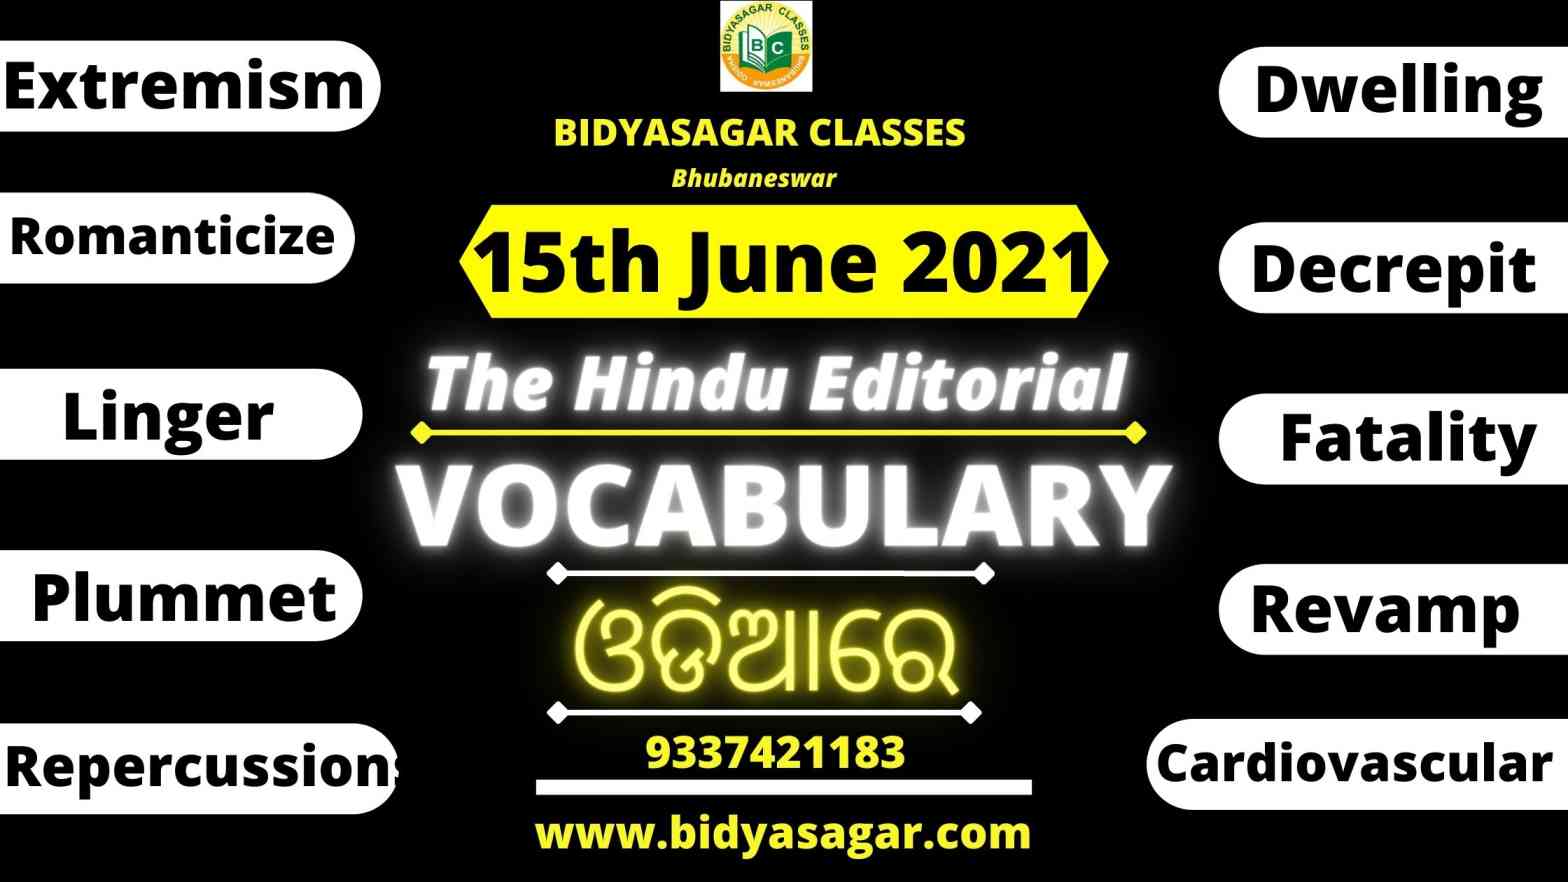 The Hindu Editorial Vocabulary of 15th June 2021